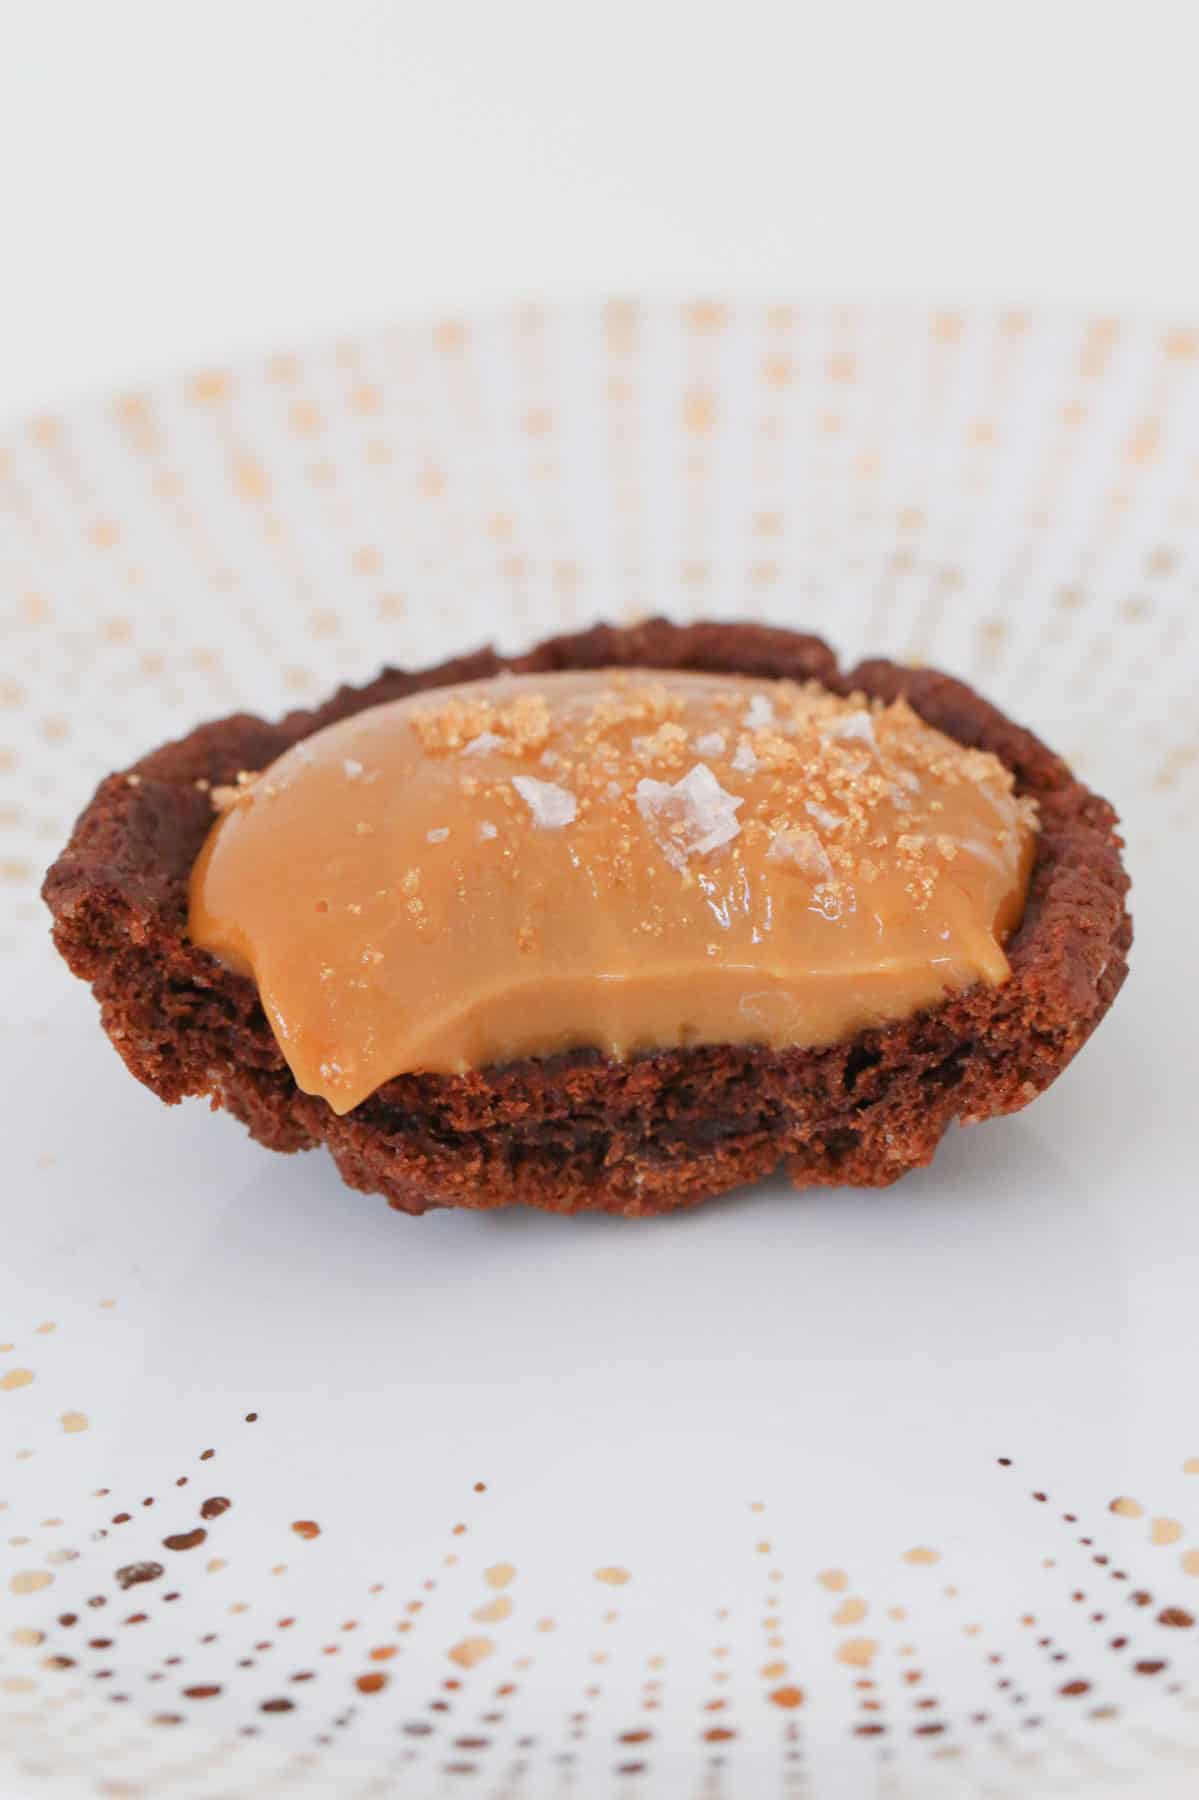 A half-eaten chocolate biscuit with a sweet caramel filling and salt.